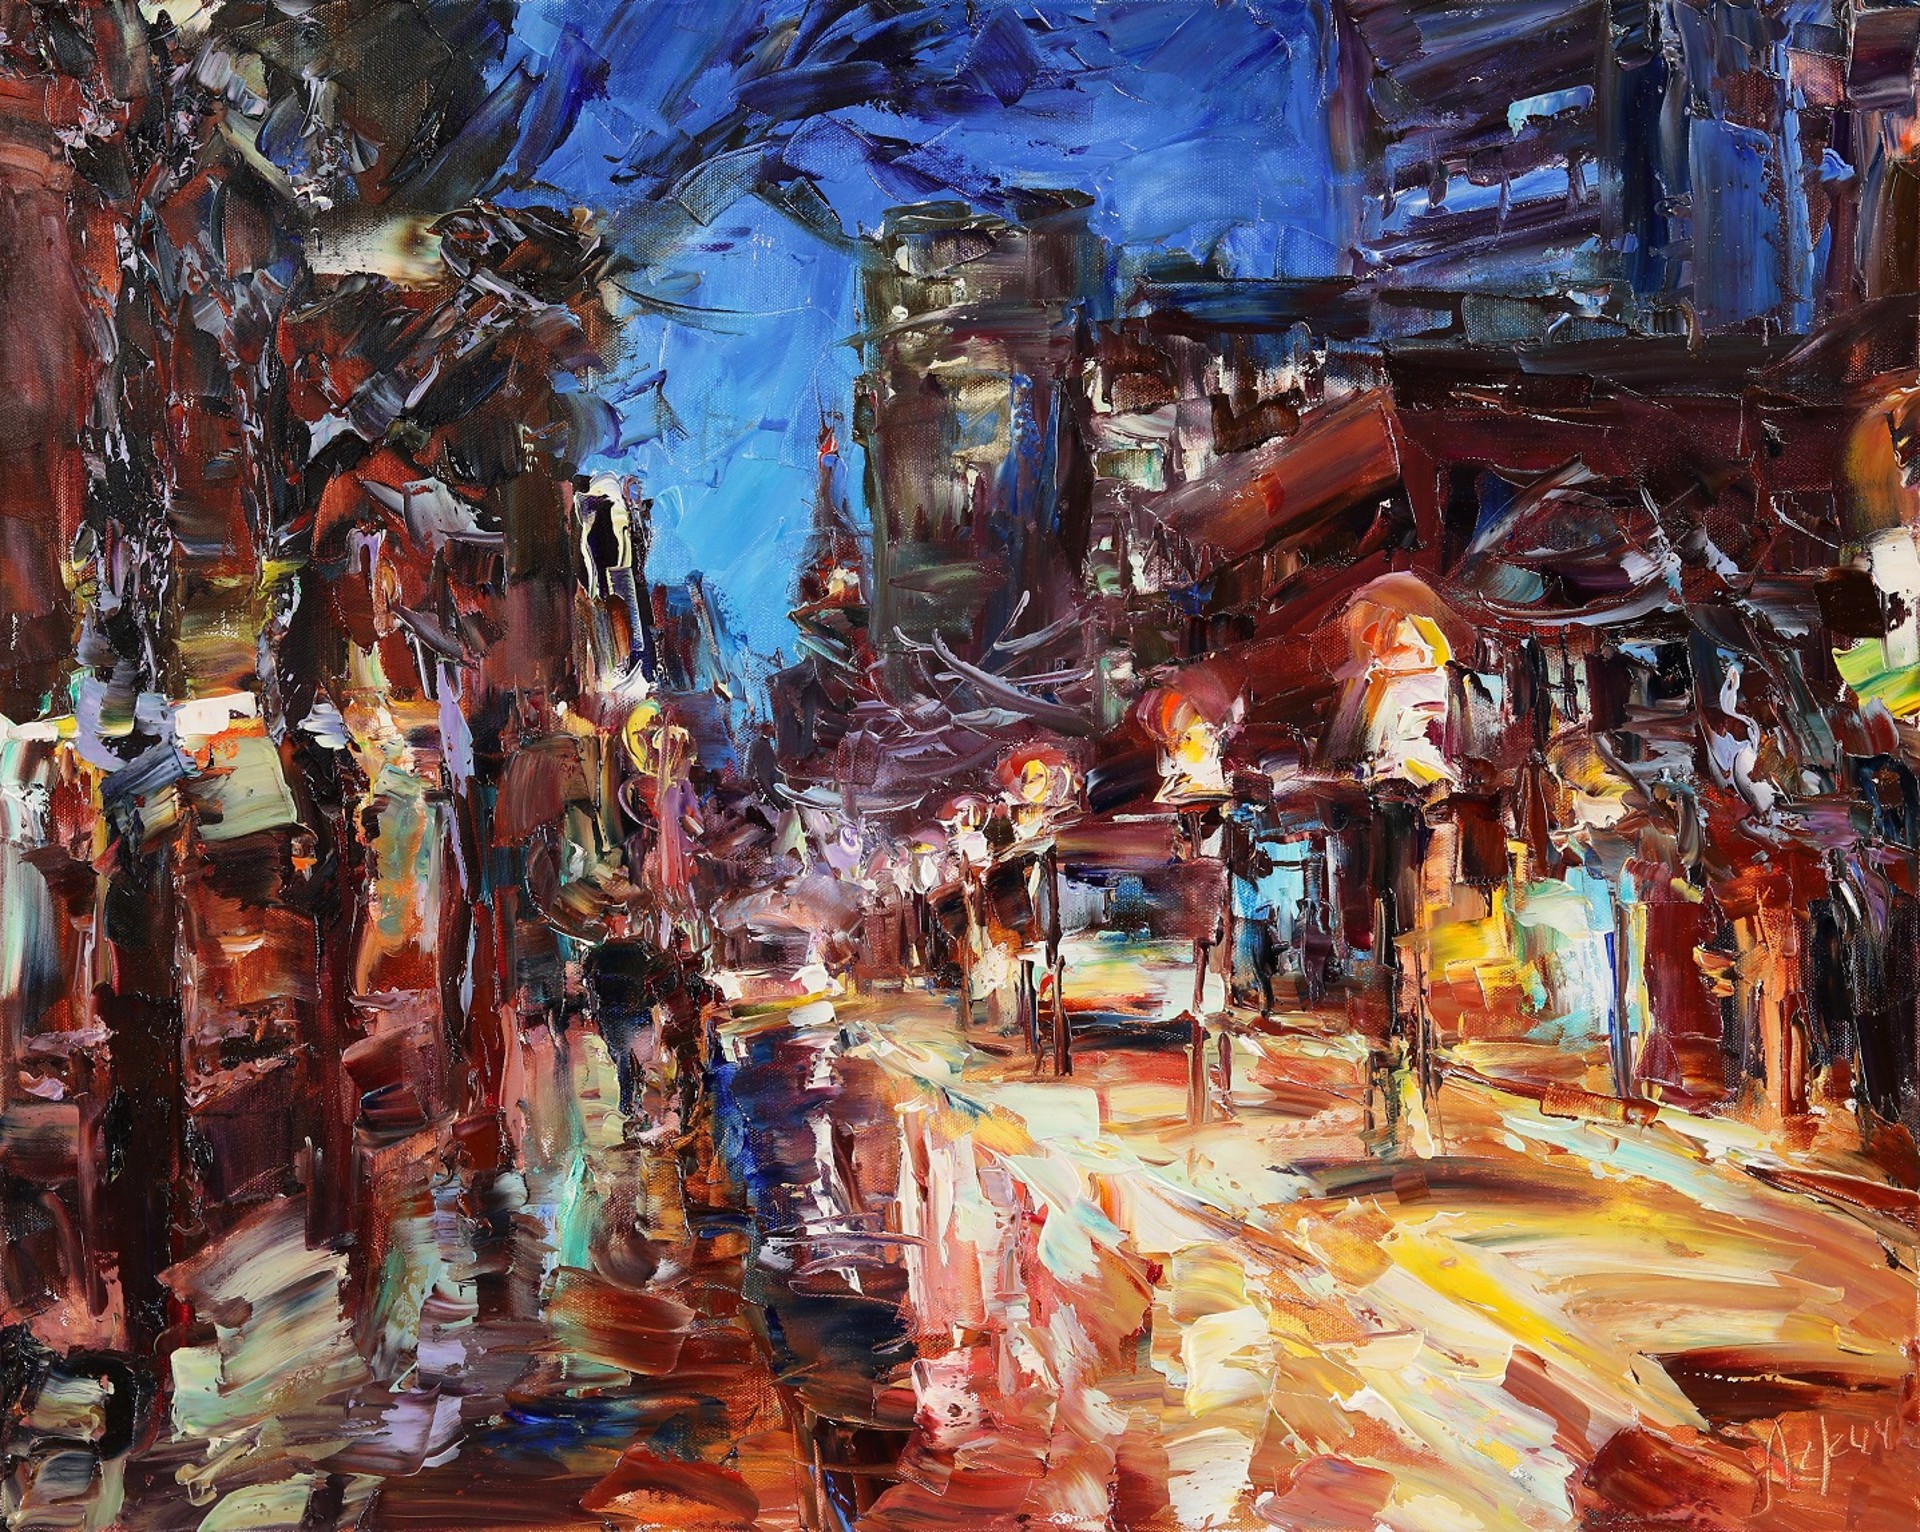 Denver at Night (SOLD) by LYUDMILA AGRICH